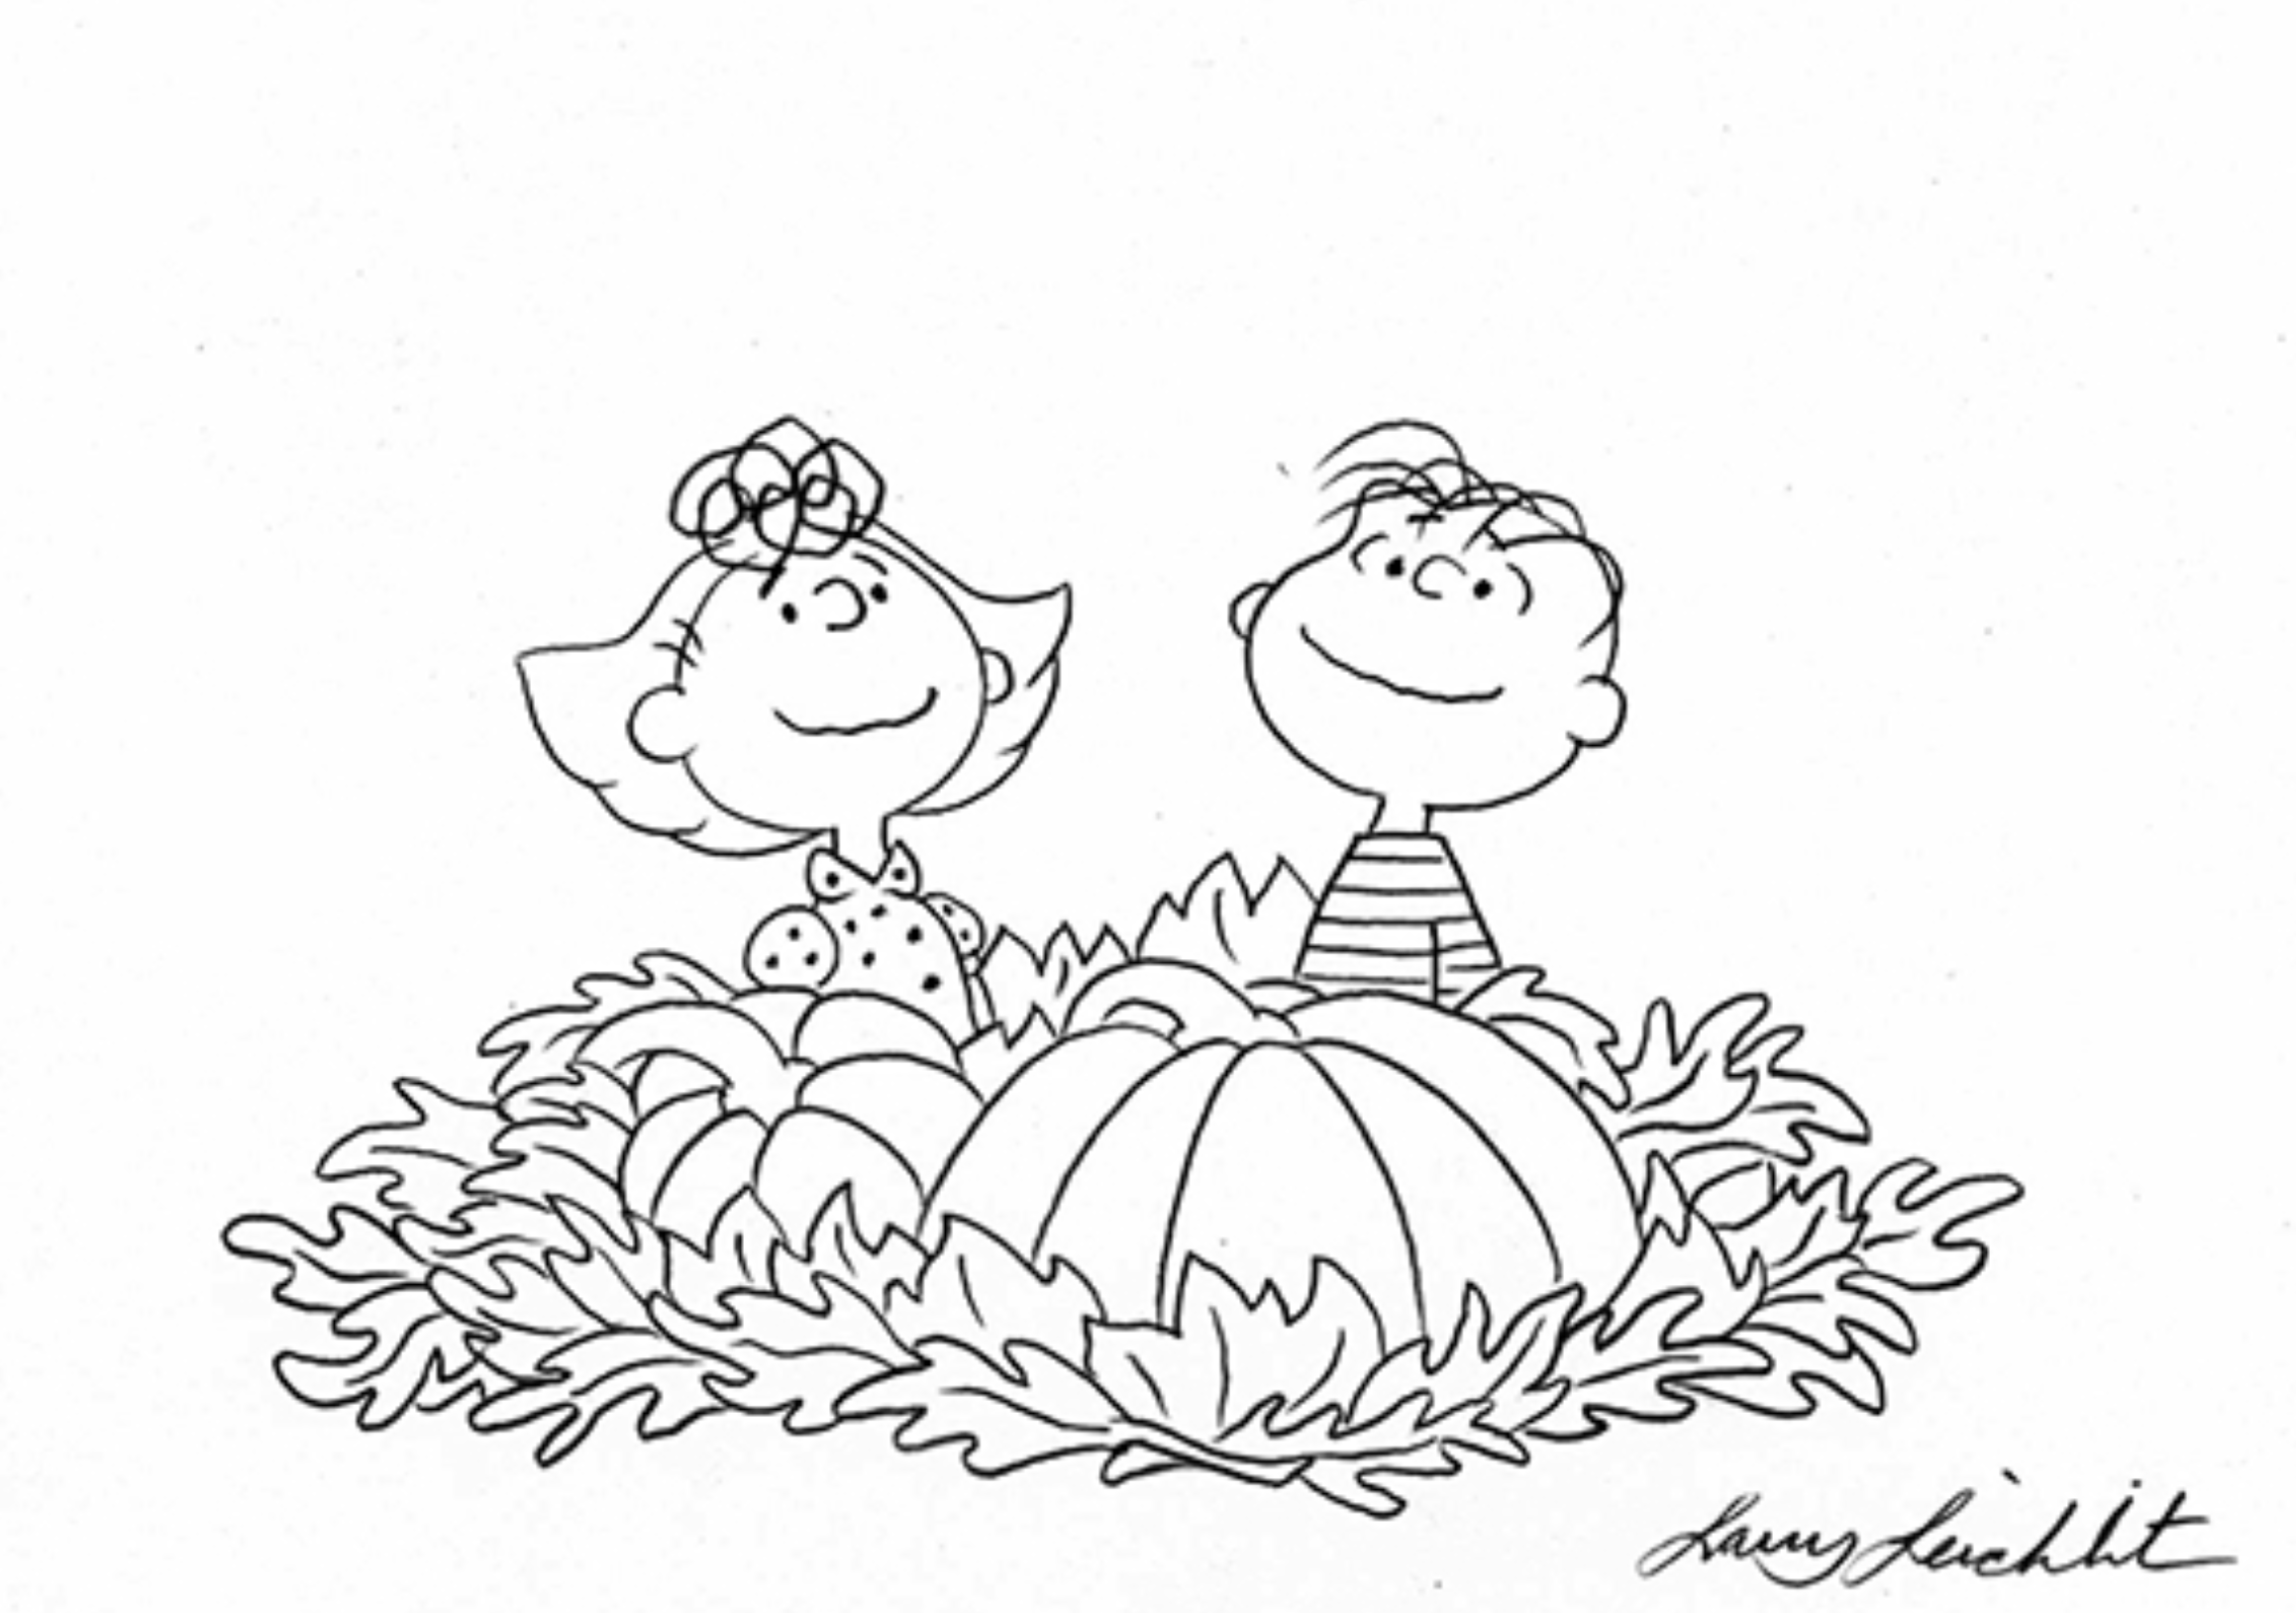 The great pumpkin snoopy and peanuts gang limited edition giclee on paper